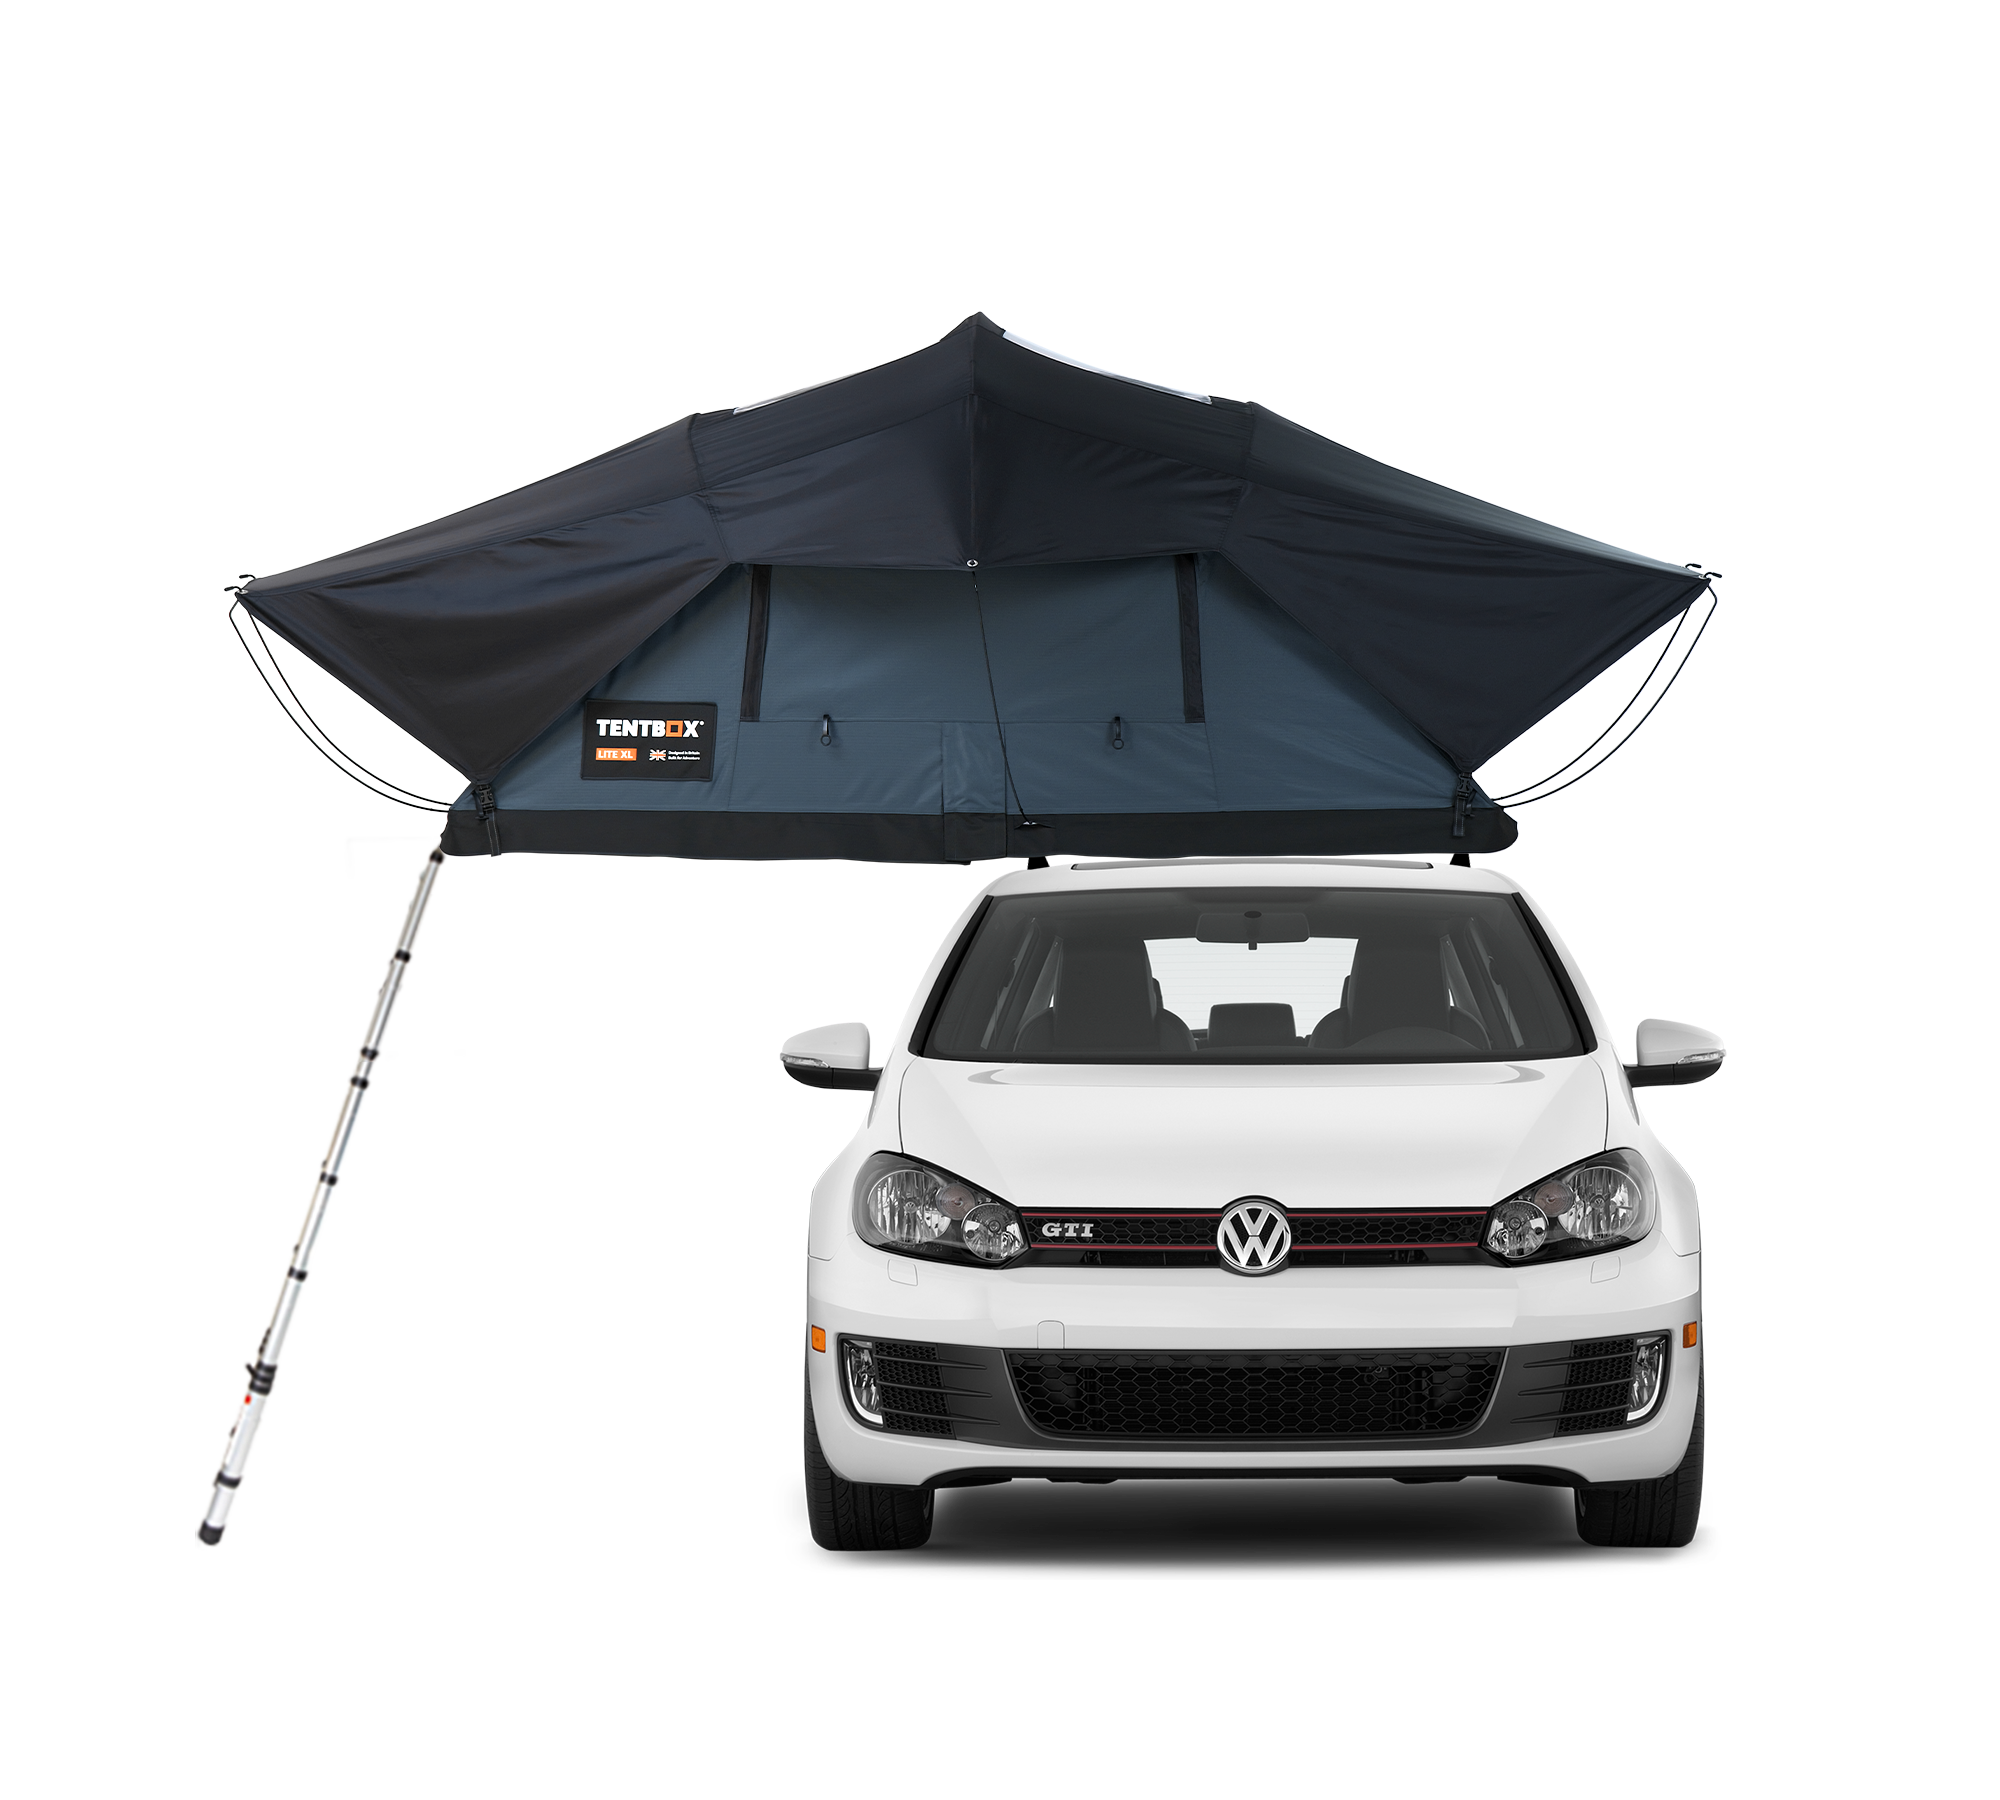 TentBox Lite XL - Large Family Roof Tent for 4 people 